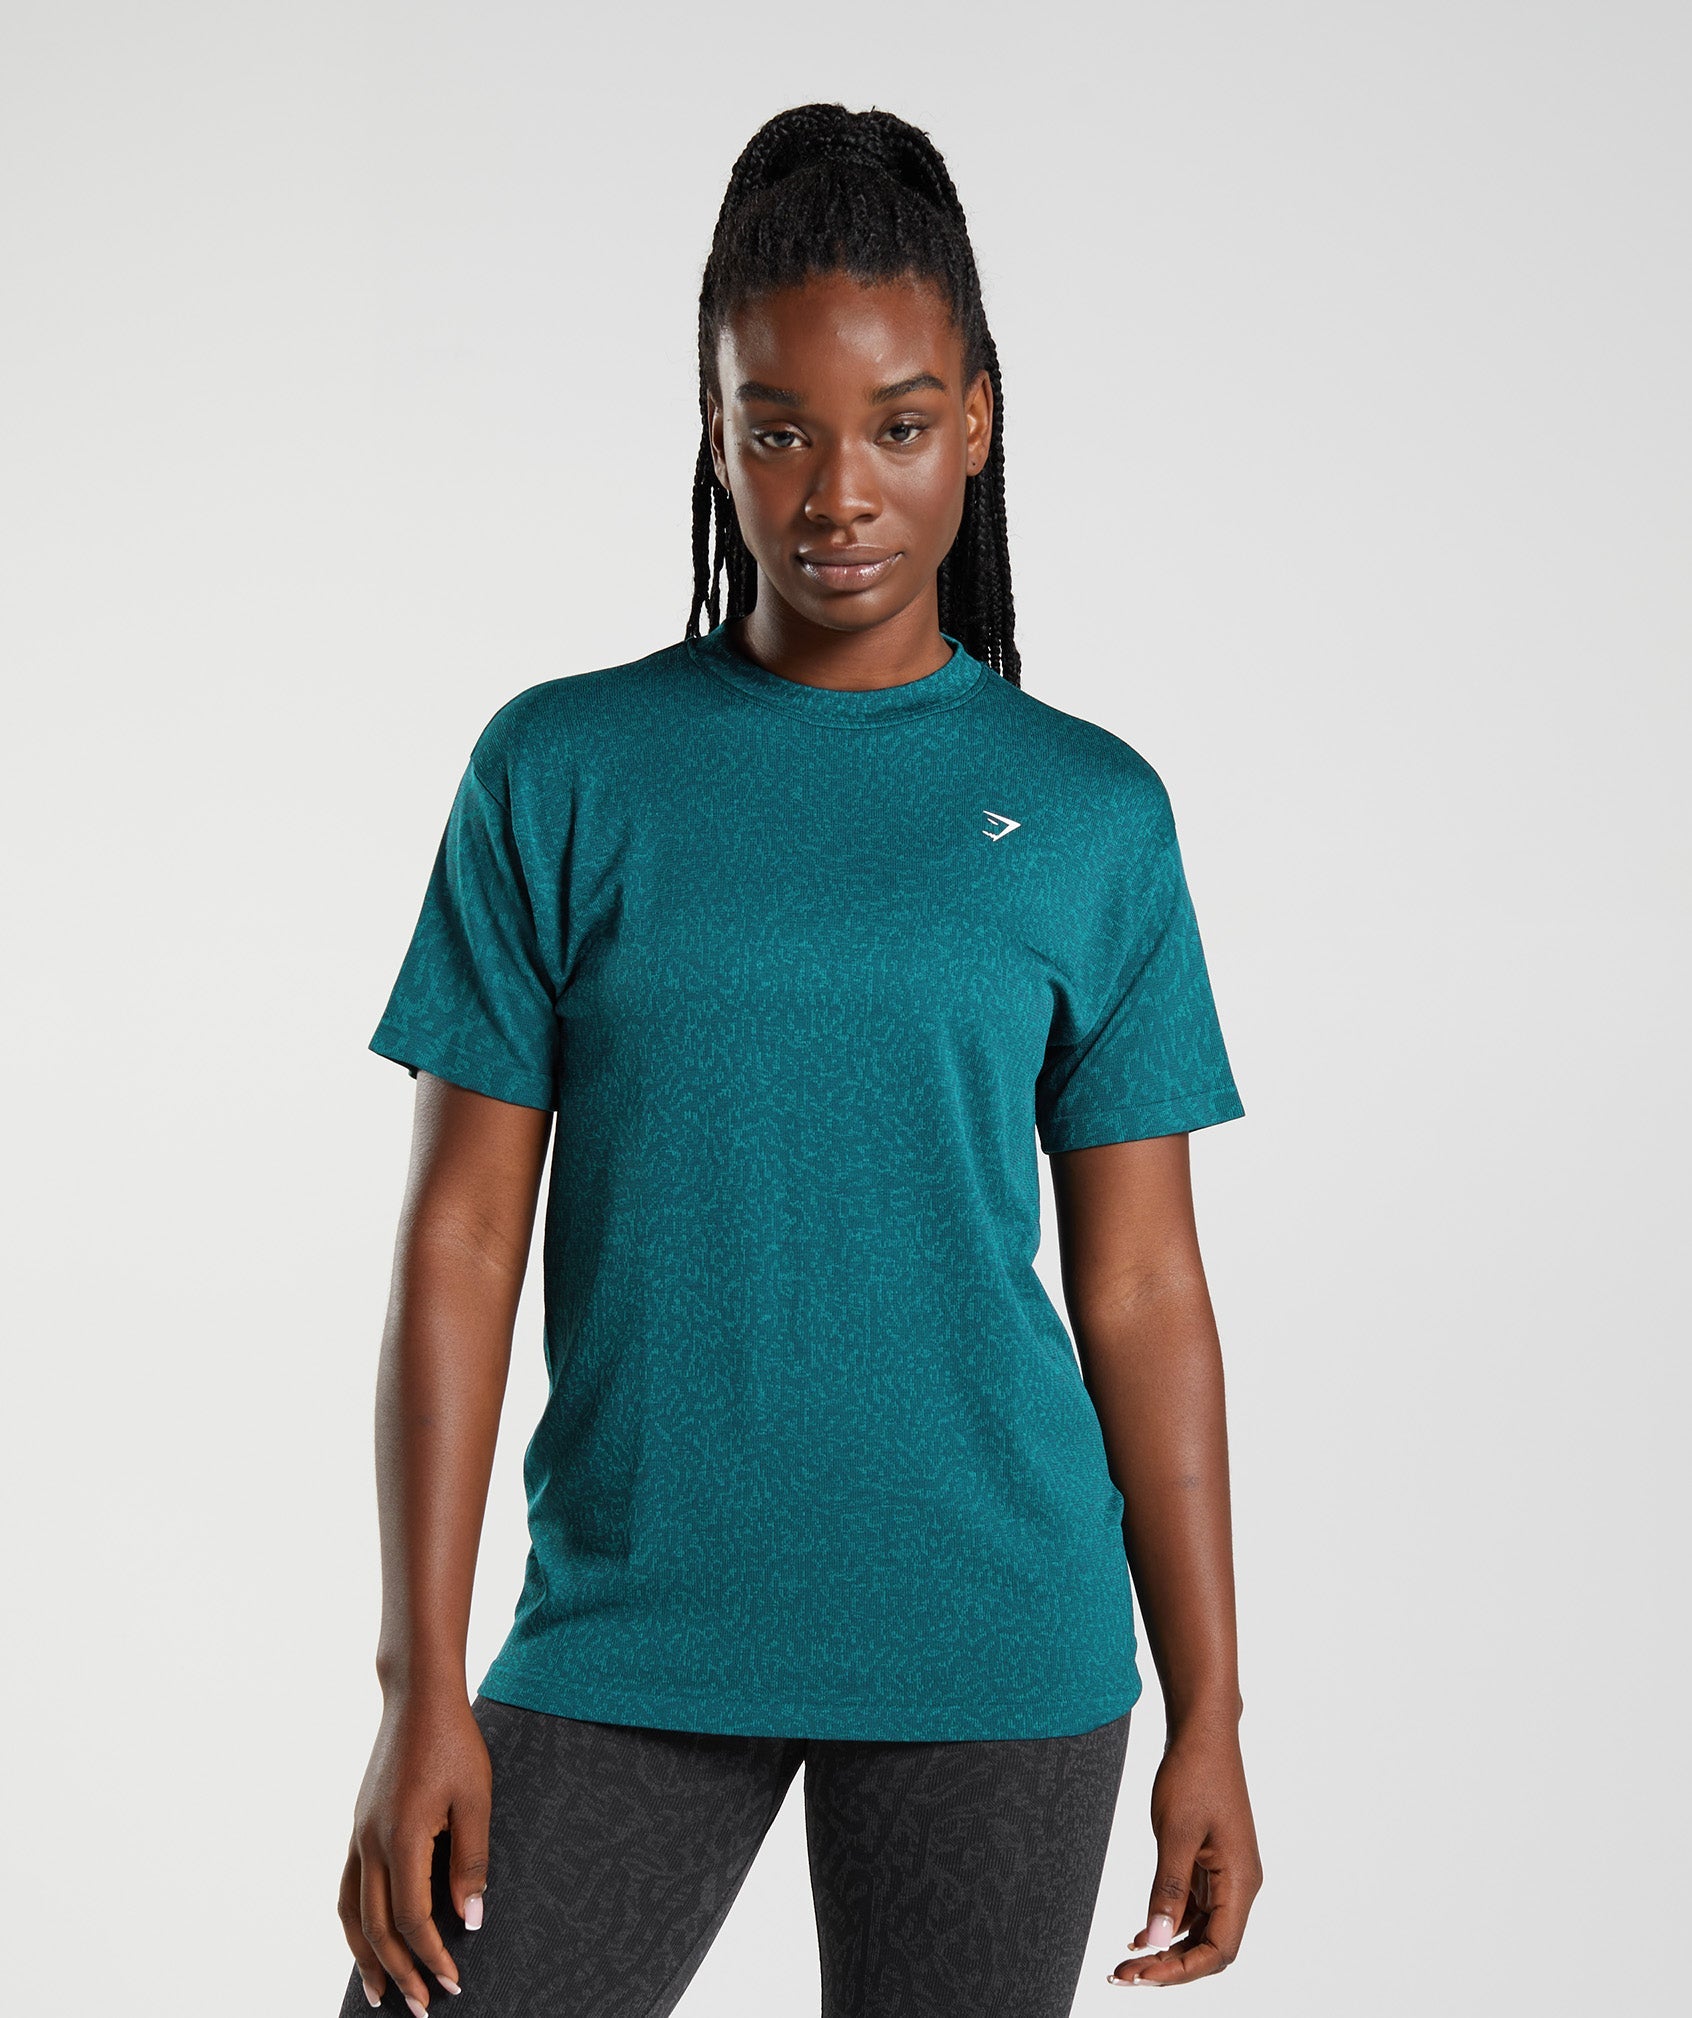 Adapt Animal Seamless T-Shirt in Reef | Winter Teal - view 1